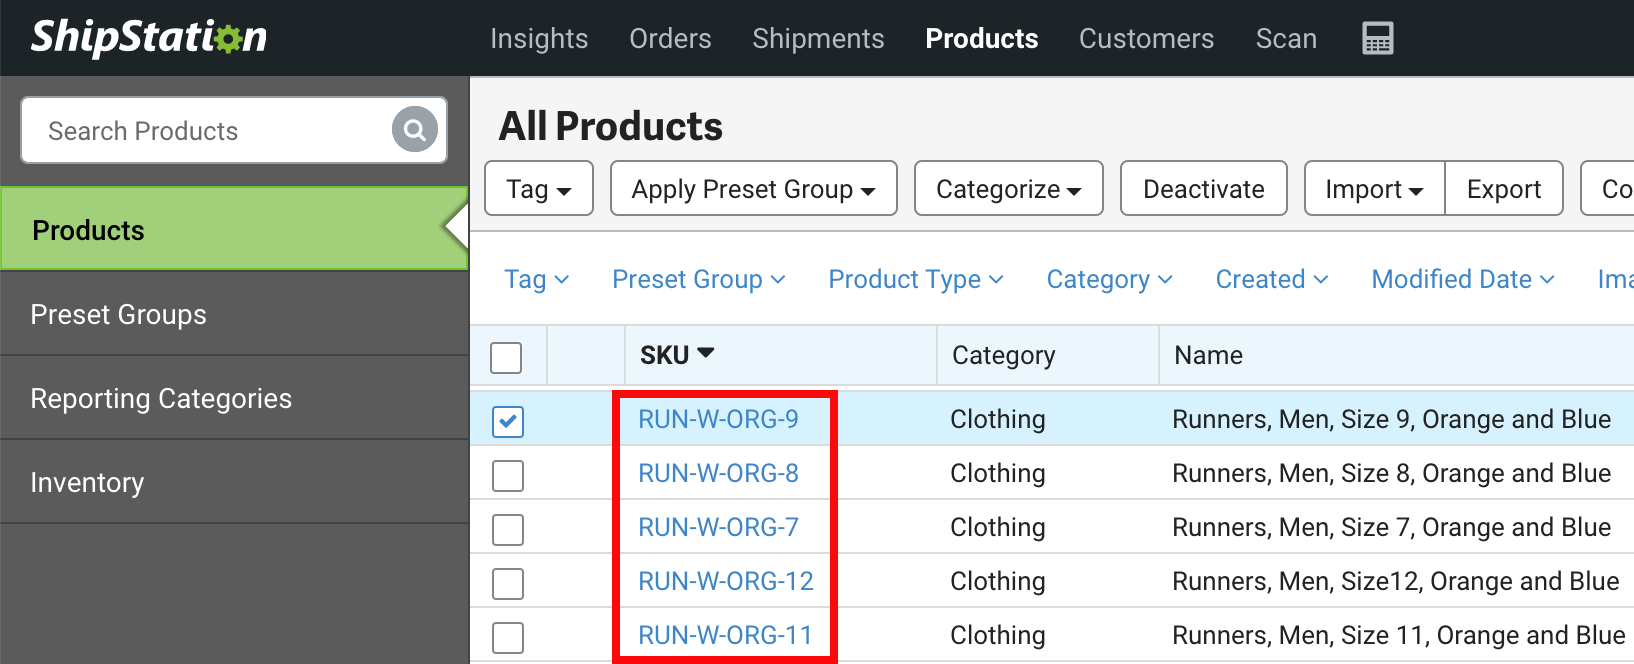 Products grid. Red box around SKUs in SKU column to show hyperlinks to Product Details